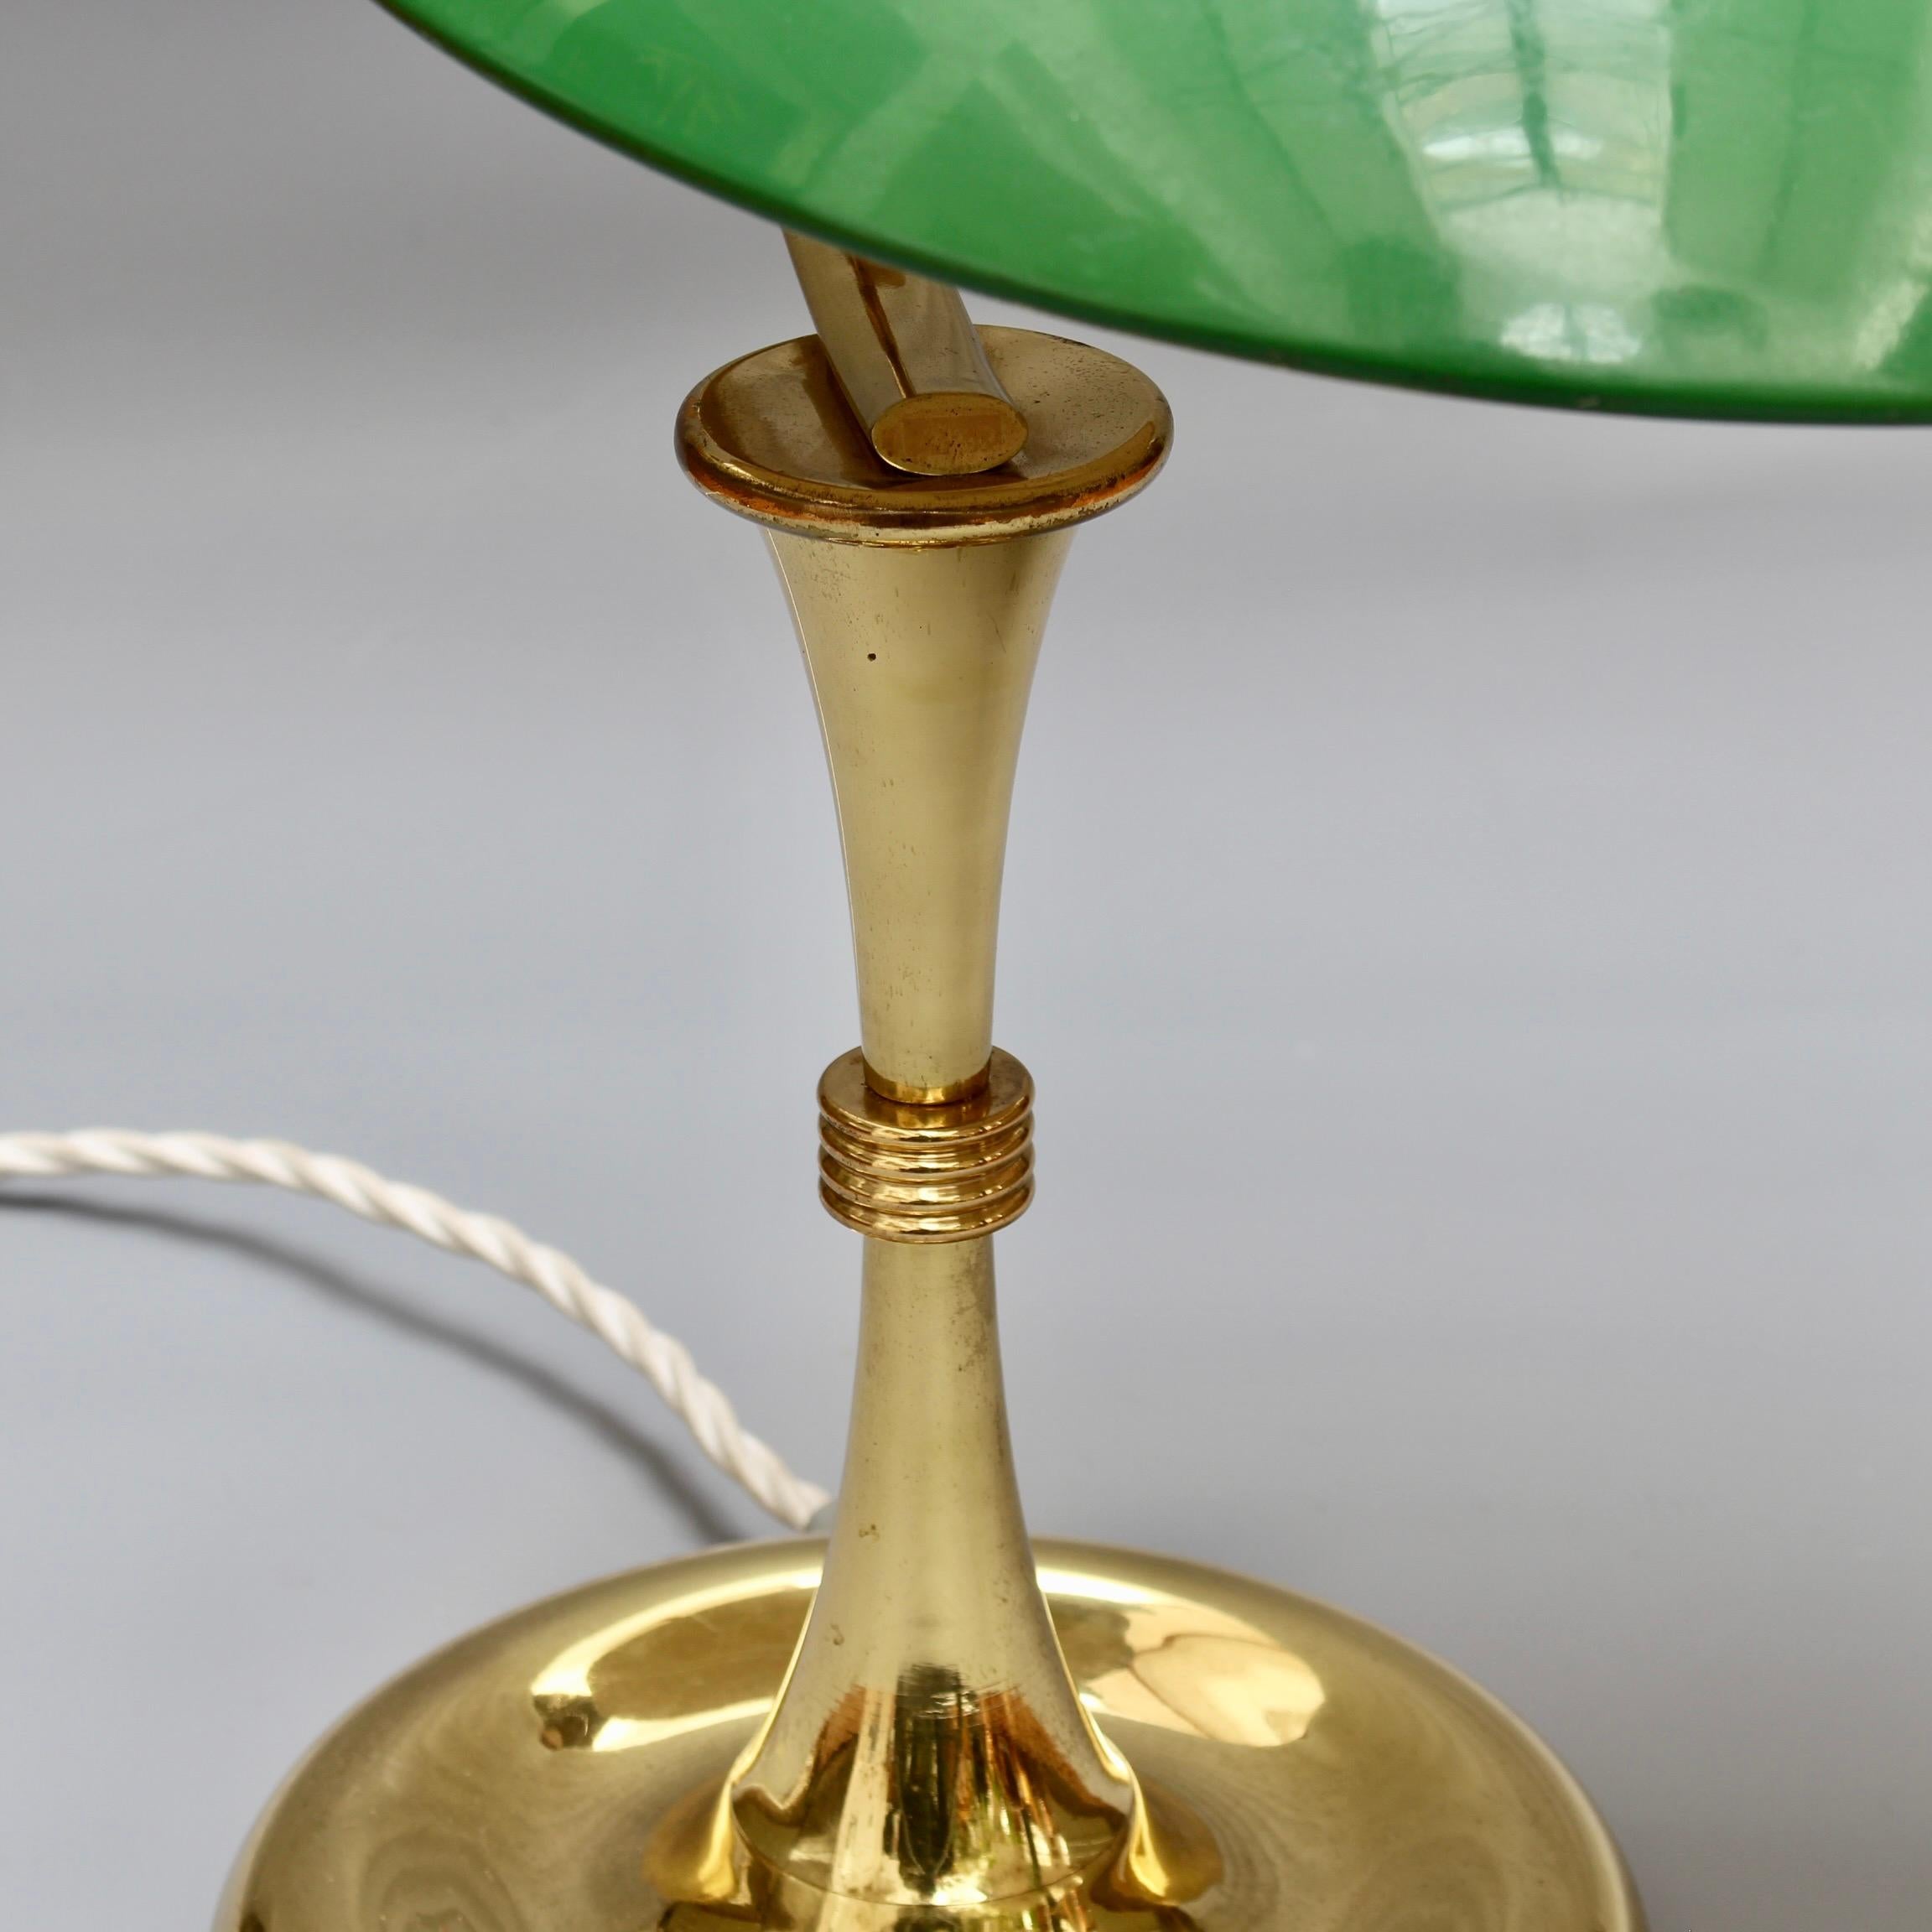 Italian Mid-Century Brass-Covered Desk Lamp with Green Shade 'circa 1950s' For Sale 6